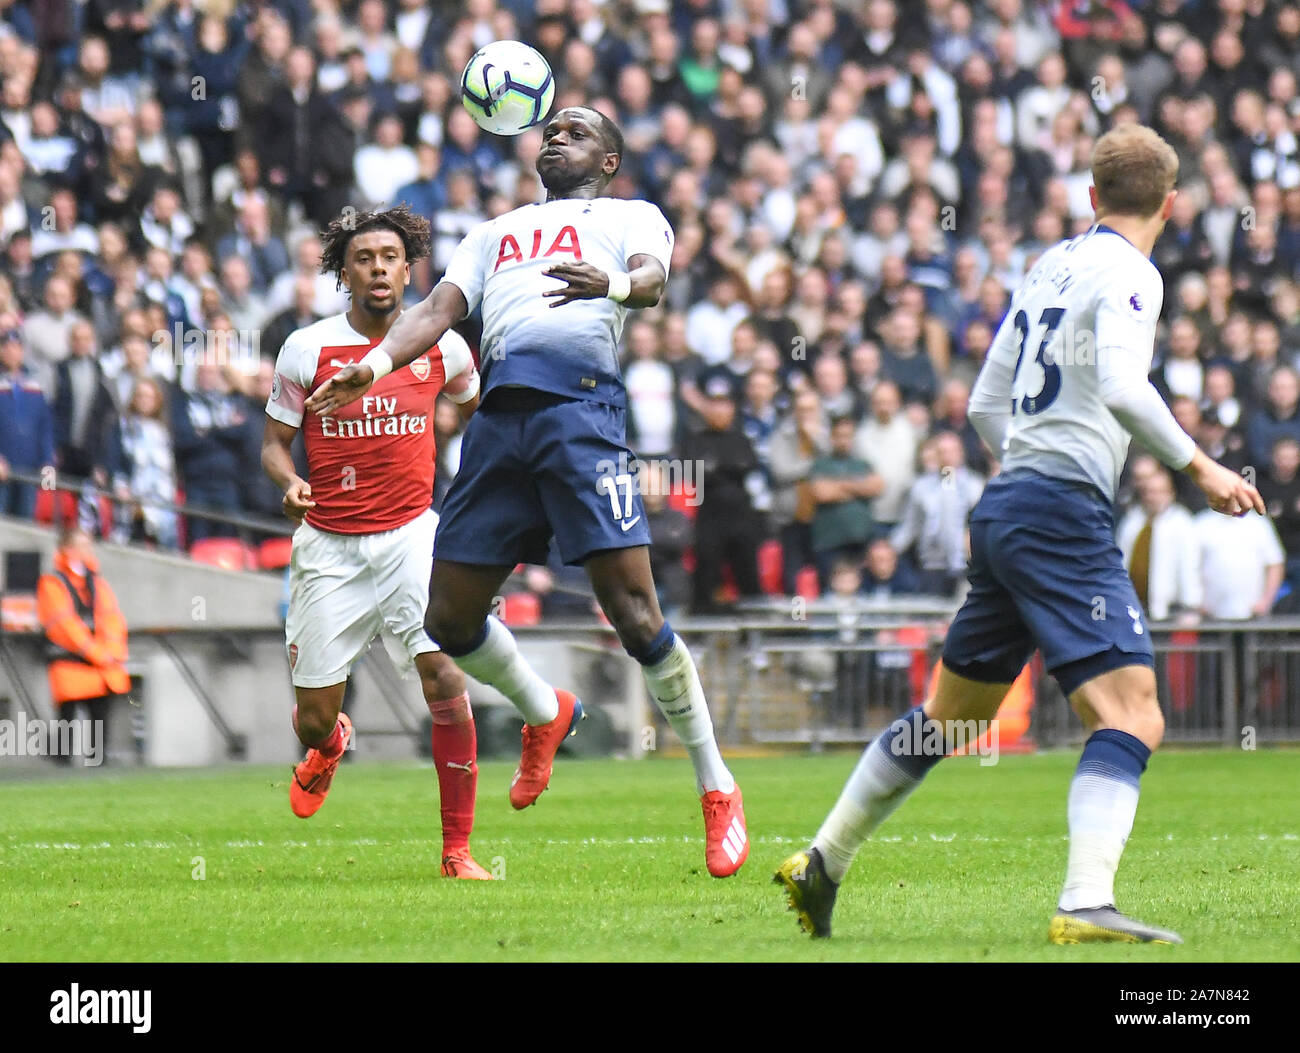 LONDON, ENGLAND - MARCH 2, 2019: Moussa Sissoko of Tottenham pictured during the 2018/19 Premier League game between Tottenham Hotspur and Arsenal FC at Wembley Stadium. Stock Photo